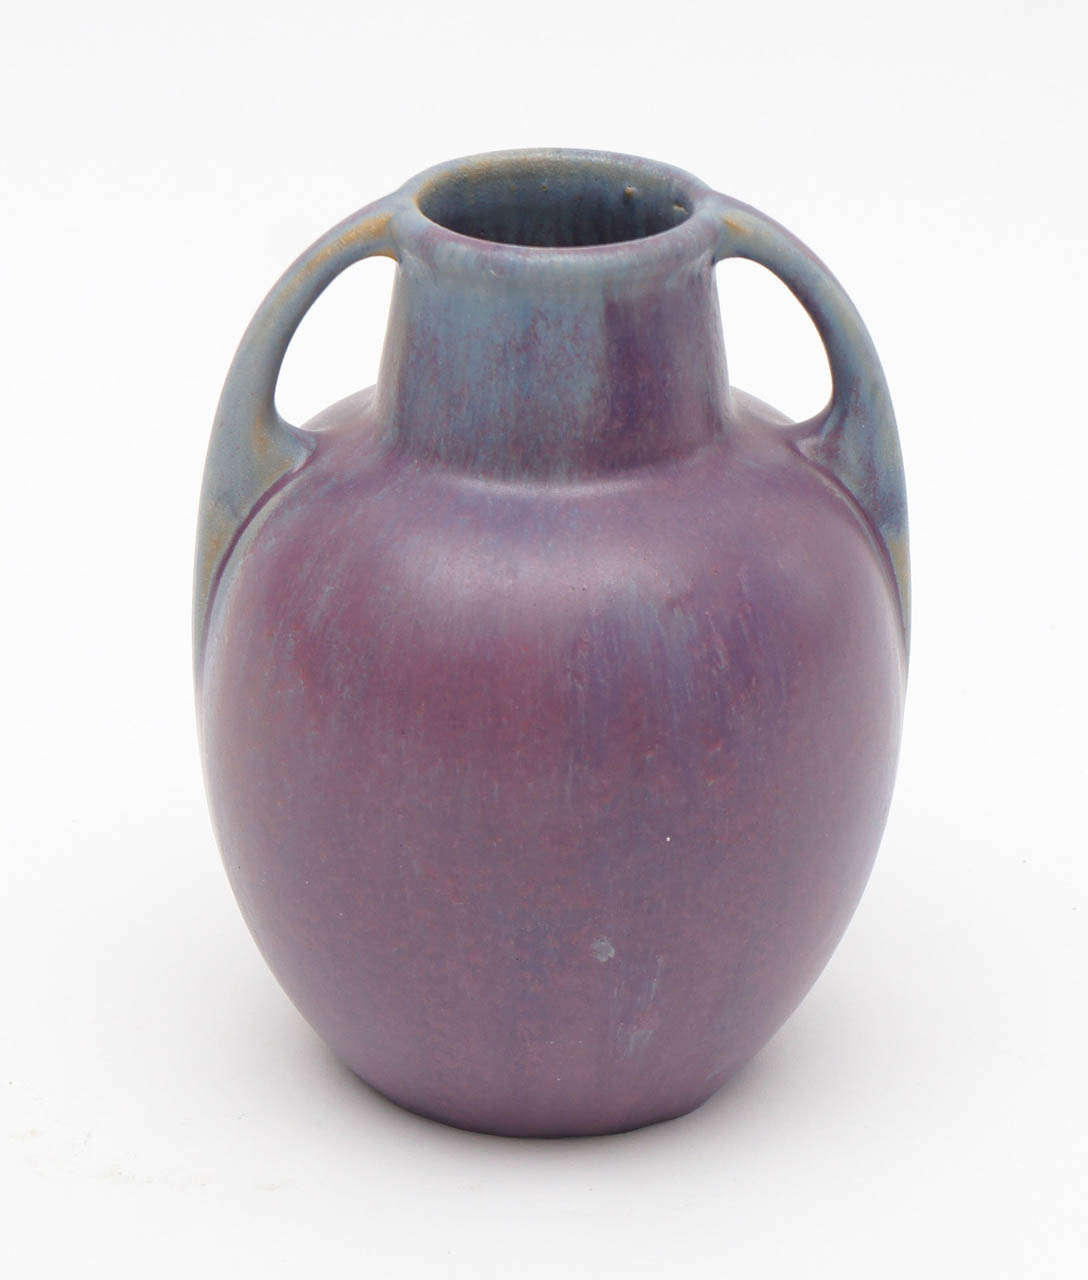 Fabulous color on this early 20thC. vase by Fulper. Color has subtle transition from blue grey to rich lavender. Form is classic Fulper! Fulper mark faint but discernable on base.